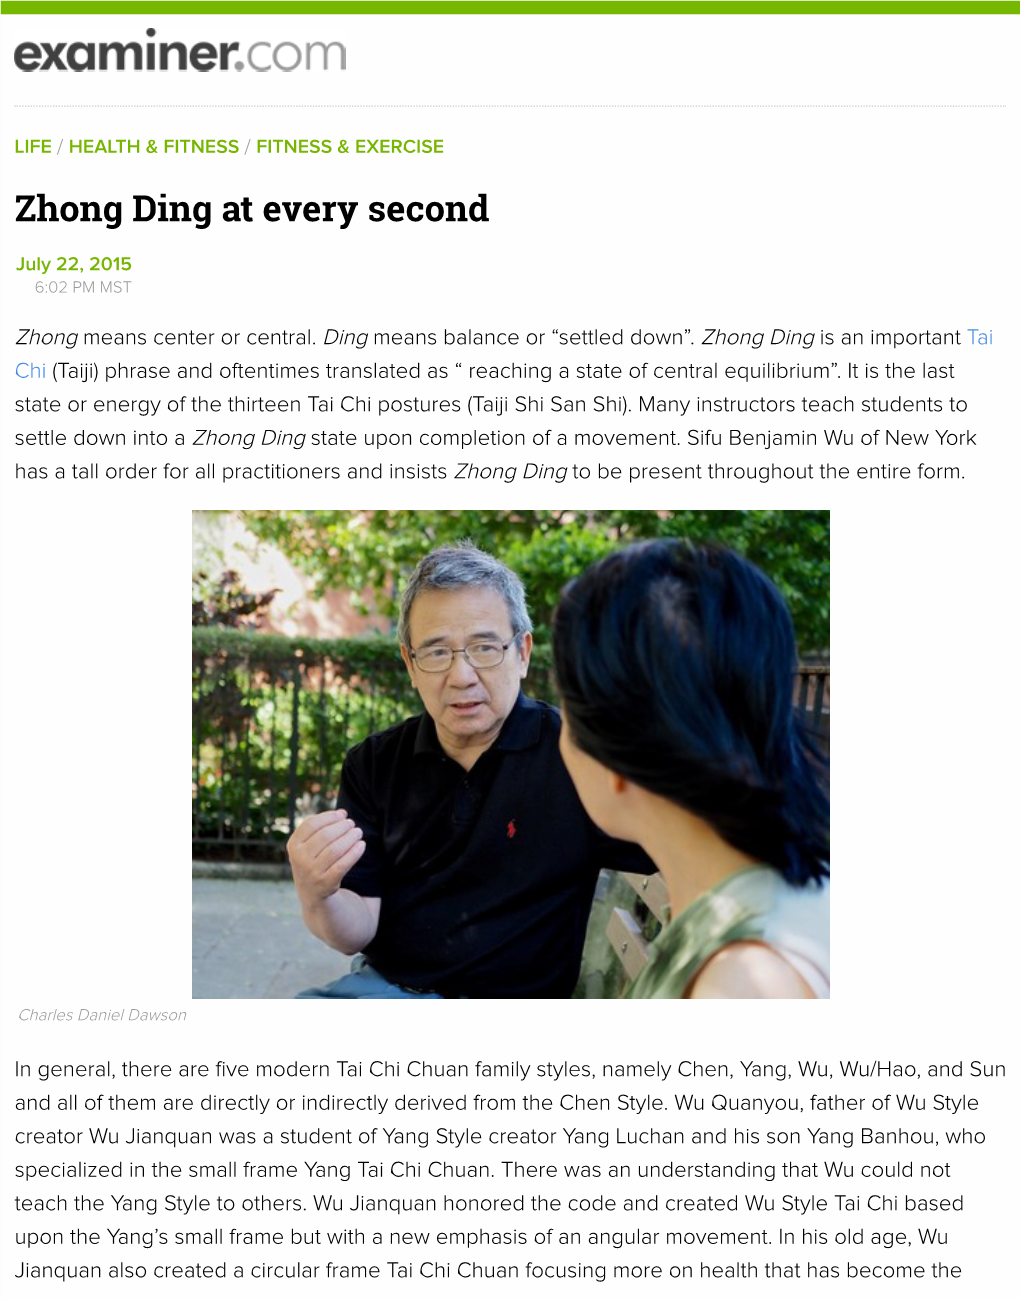 Zhong Ding at Every Second | Examiner.Com